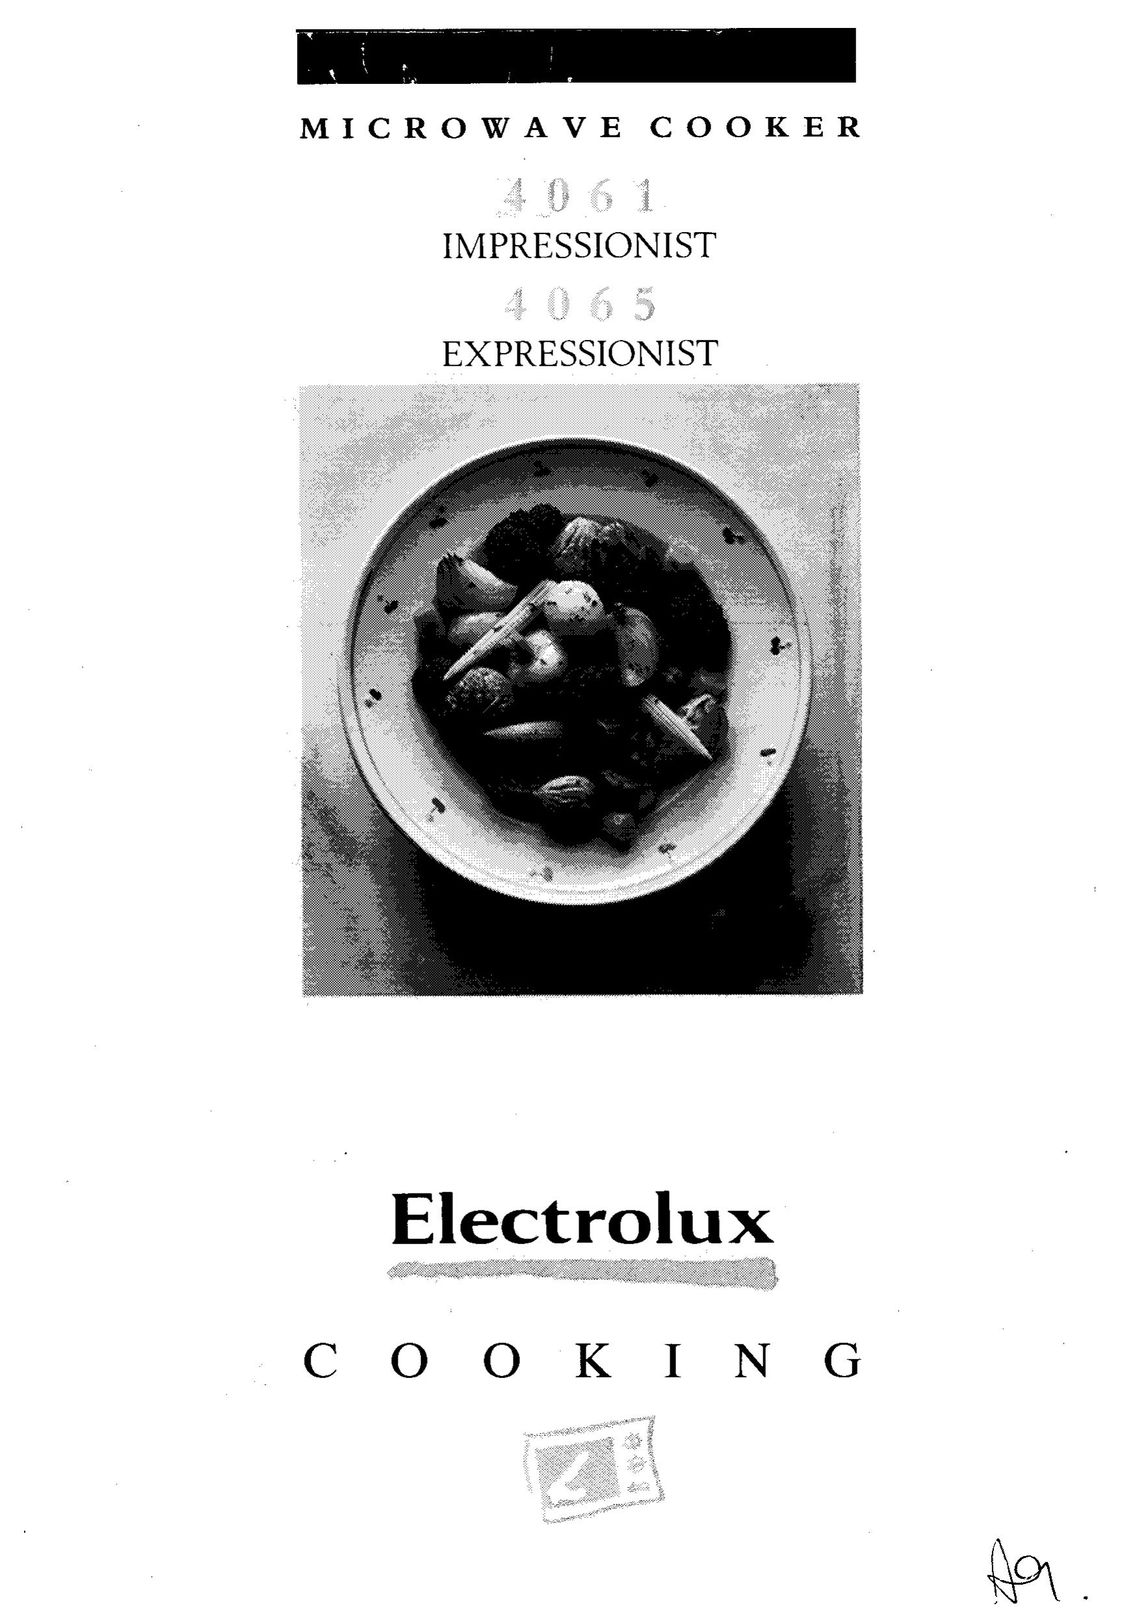 Electrolux 4061 Microwave Oven User Manual (Page 1)